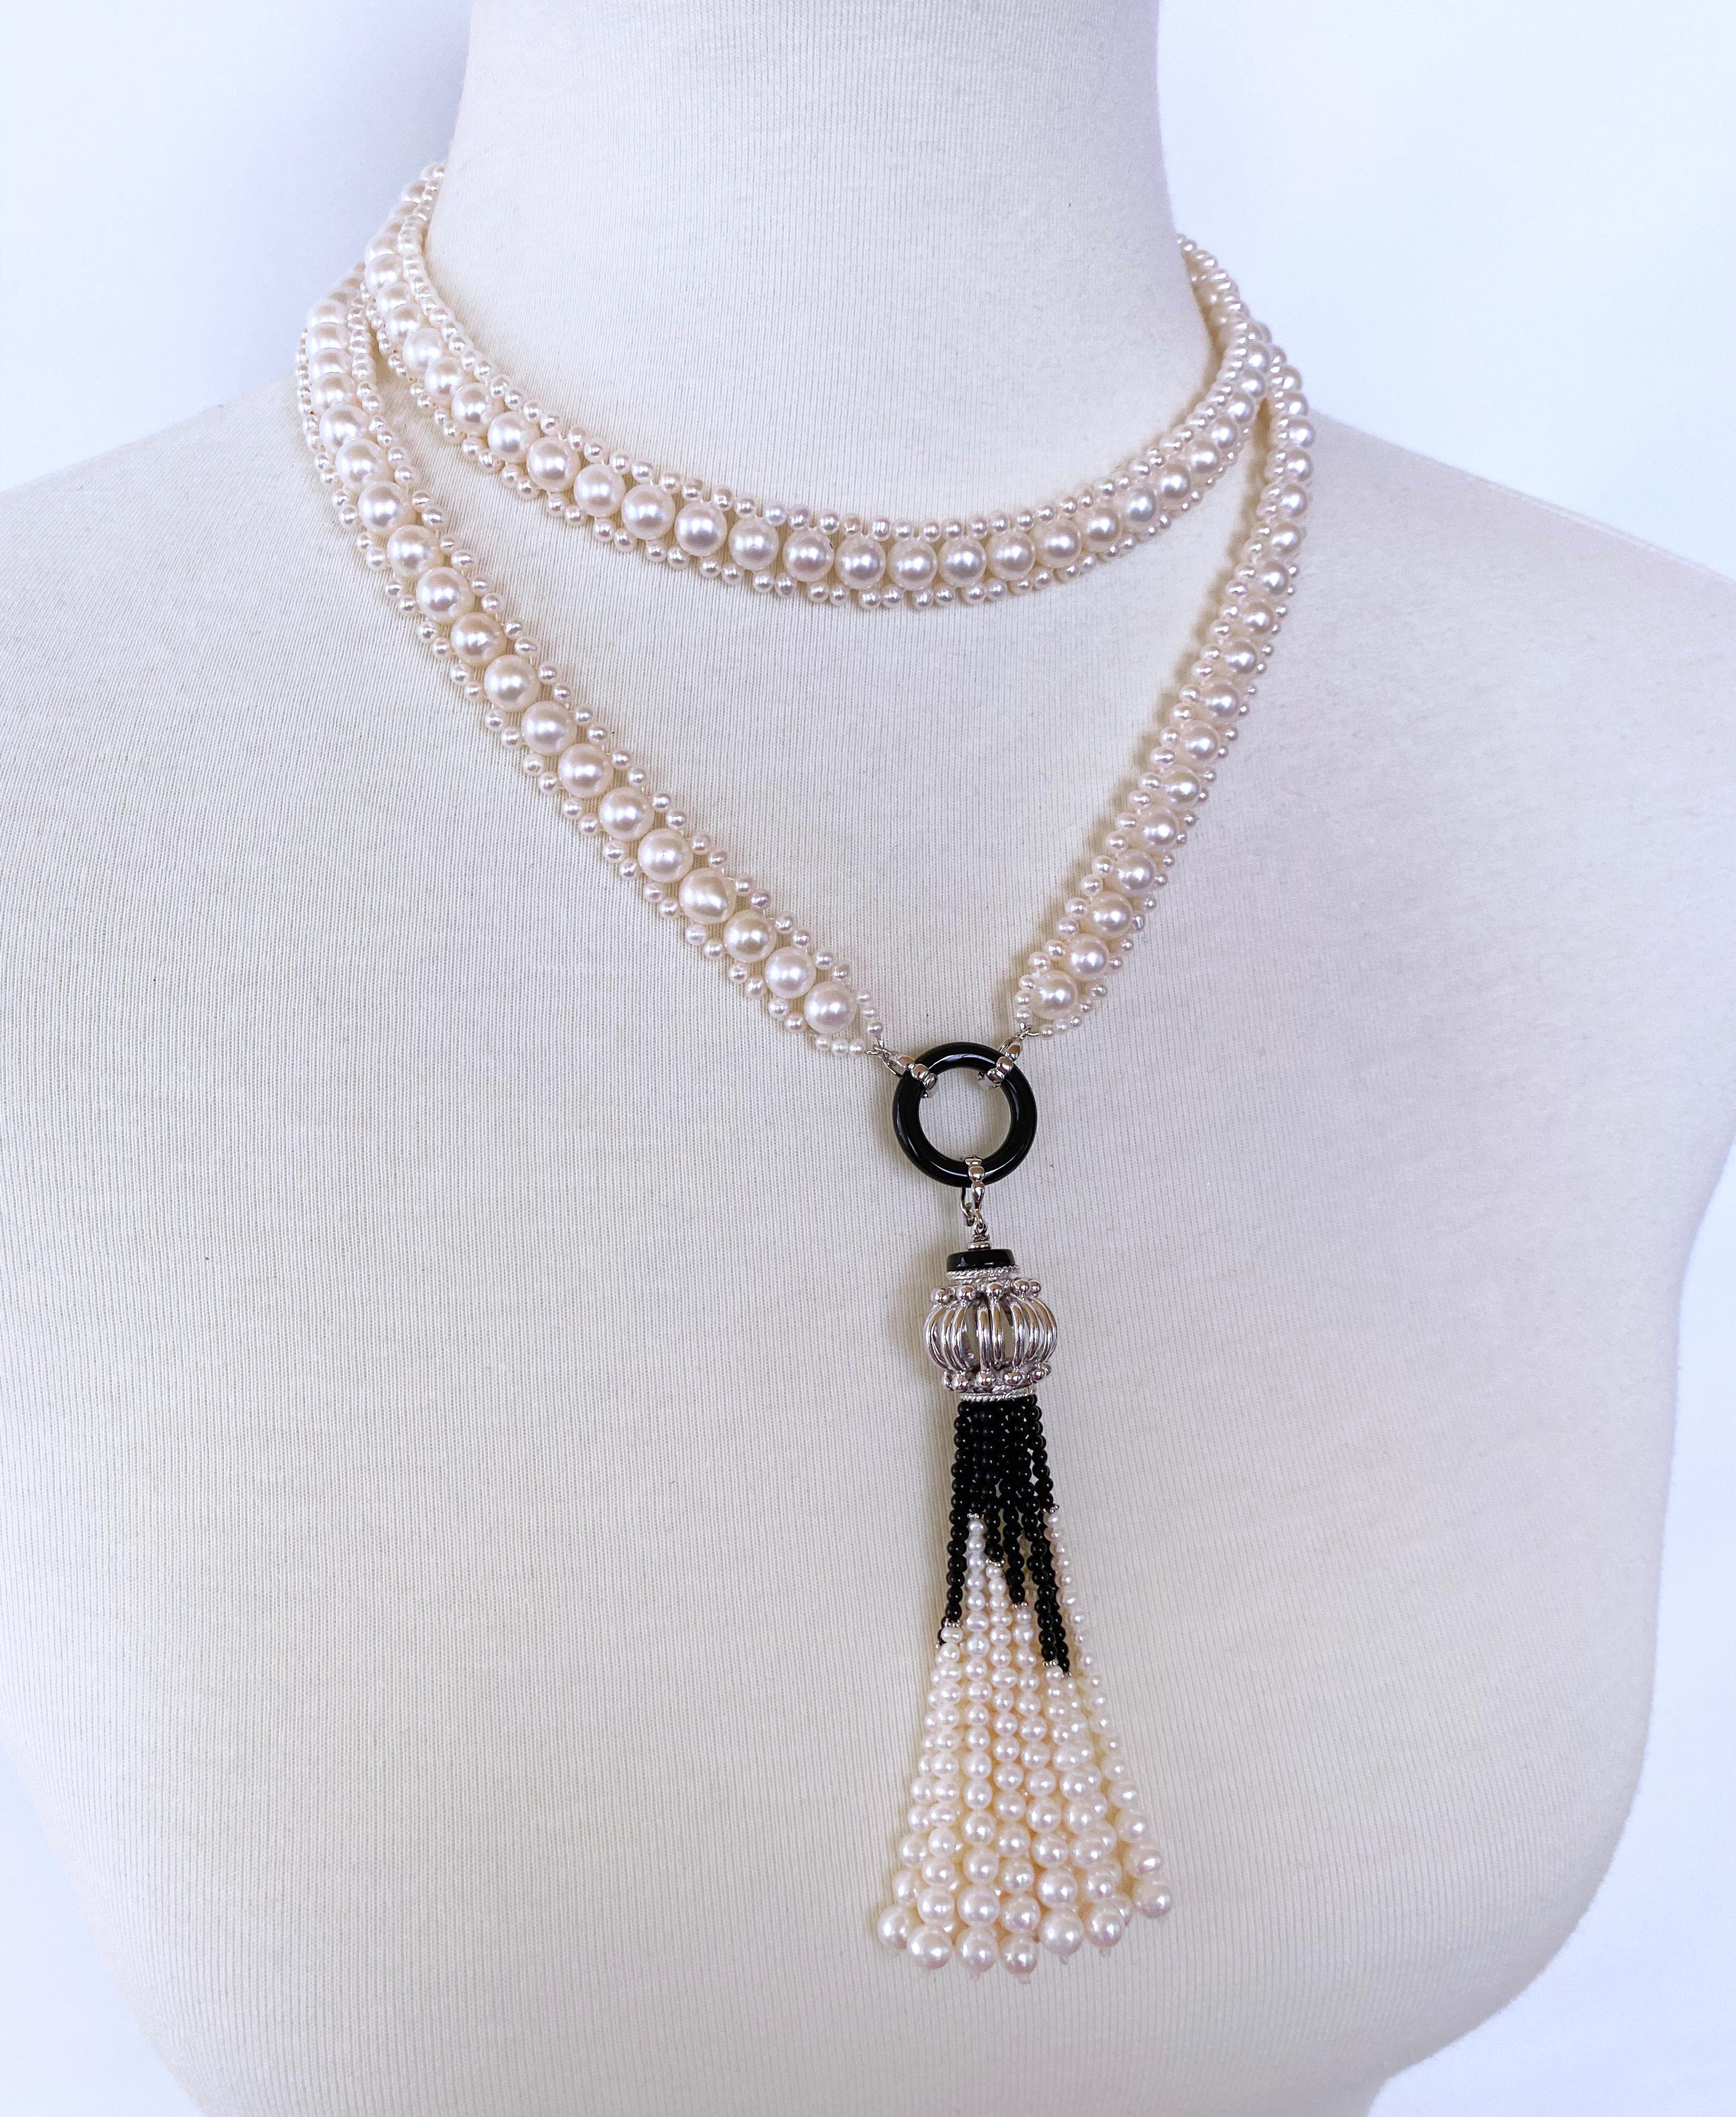 Marina J. Woven Pearl Sautoir with Black Onyx and Silver For Sale 1